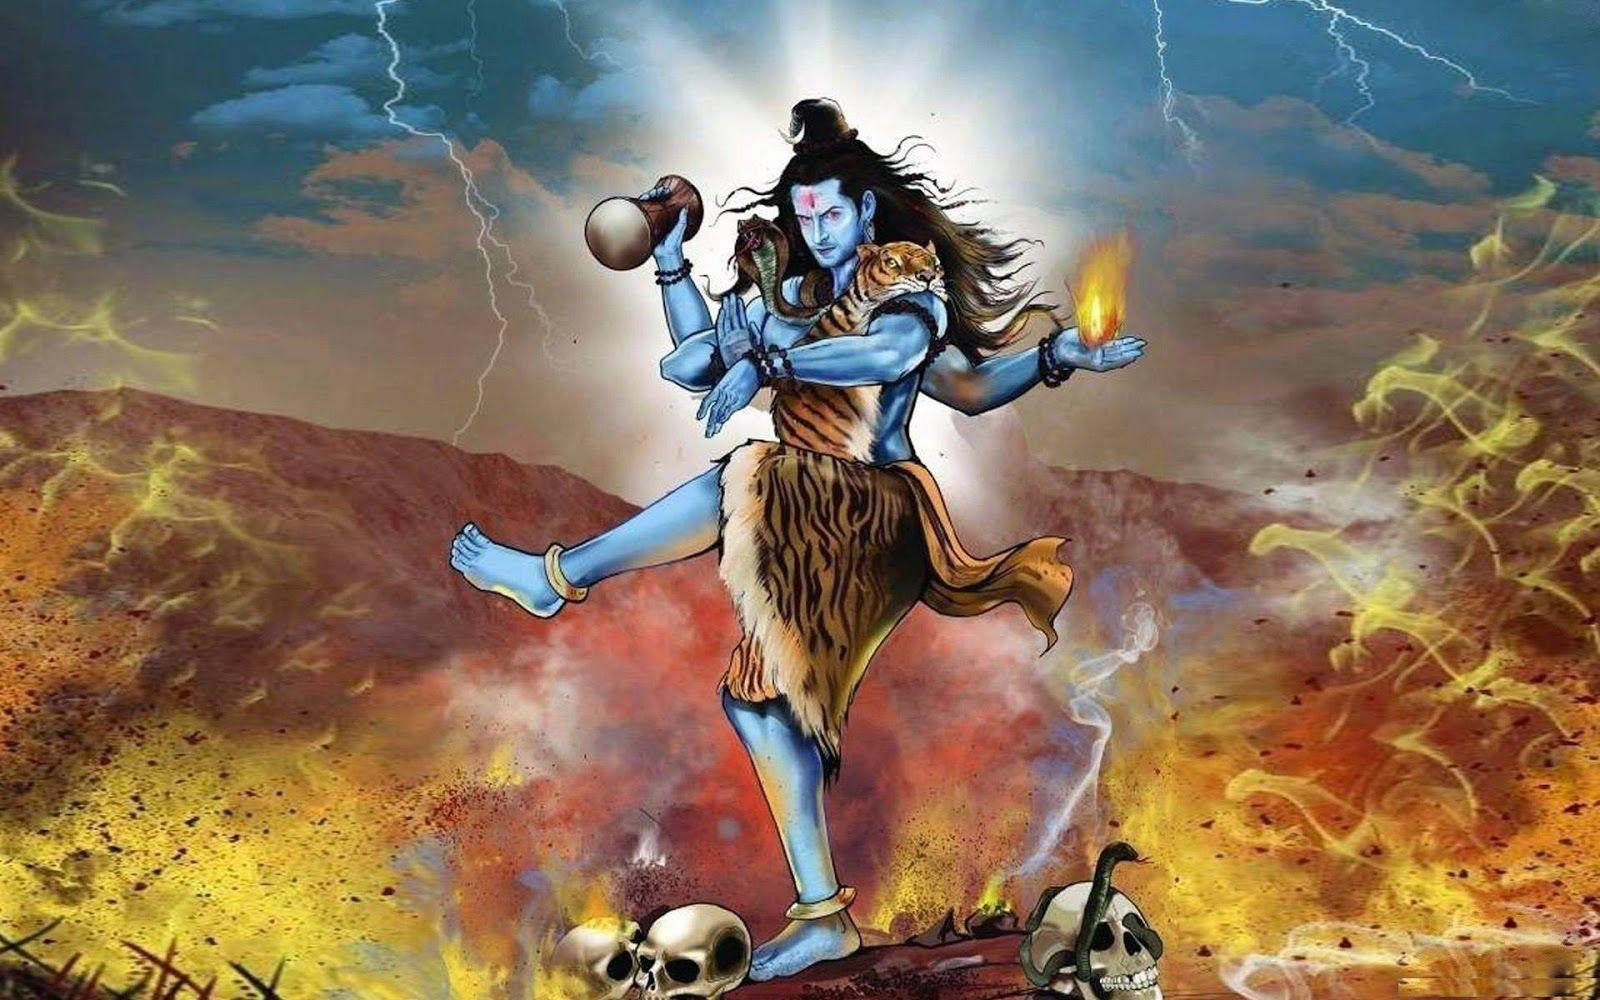 Wallpaper Rudra Avatar Lord Shiva Hd Images / Hd wallpapers and